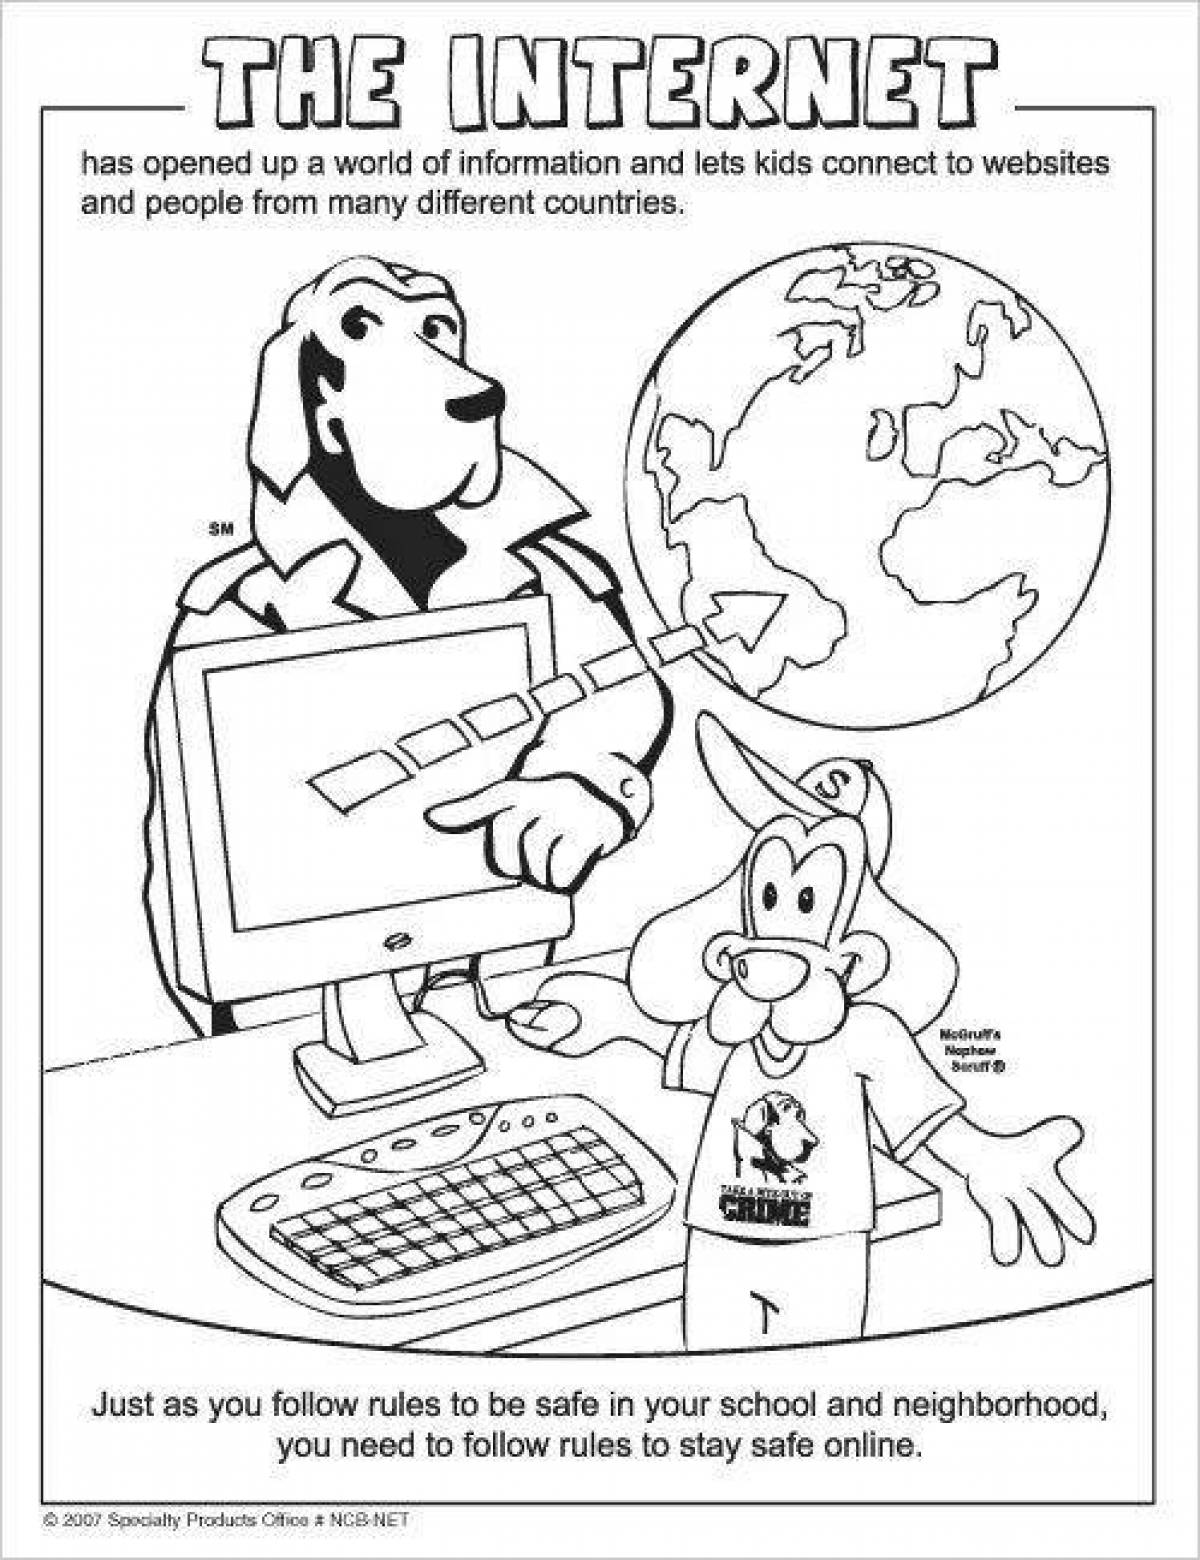 A bright and safe online coloring book for elementary school children